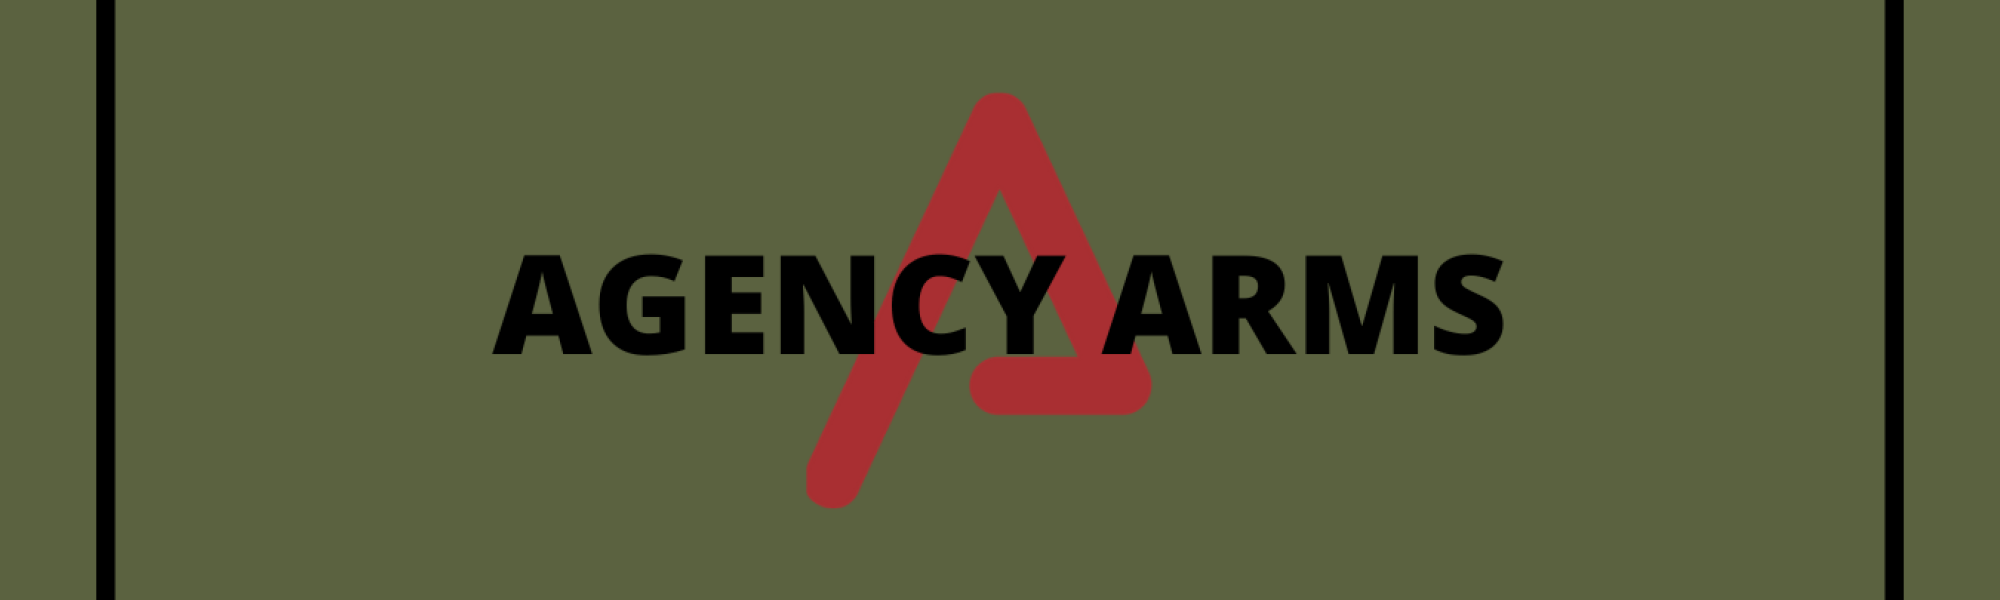 AGENCY ARMS (3)